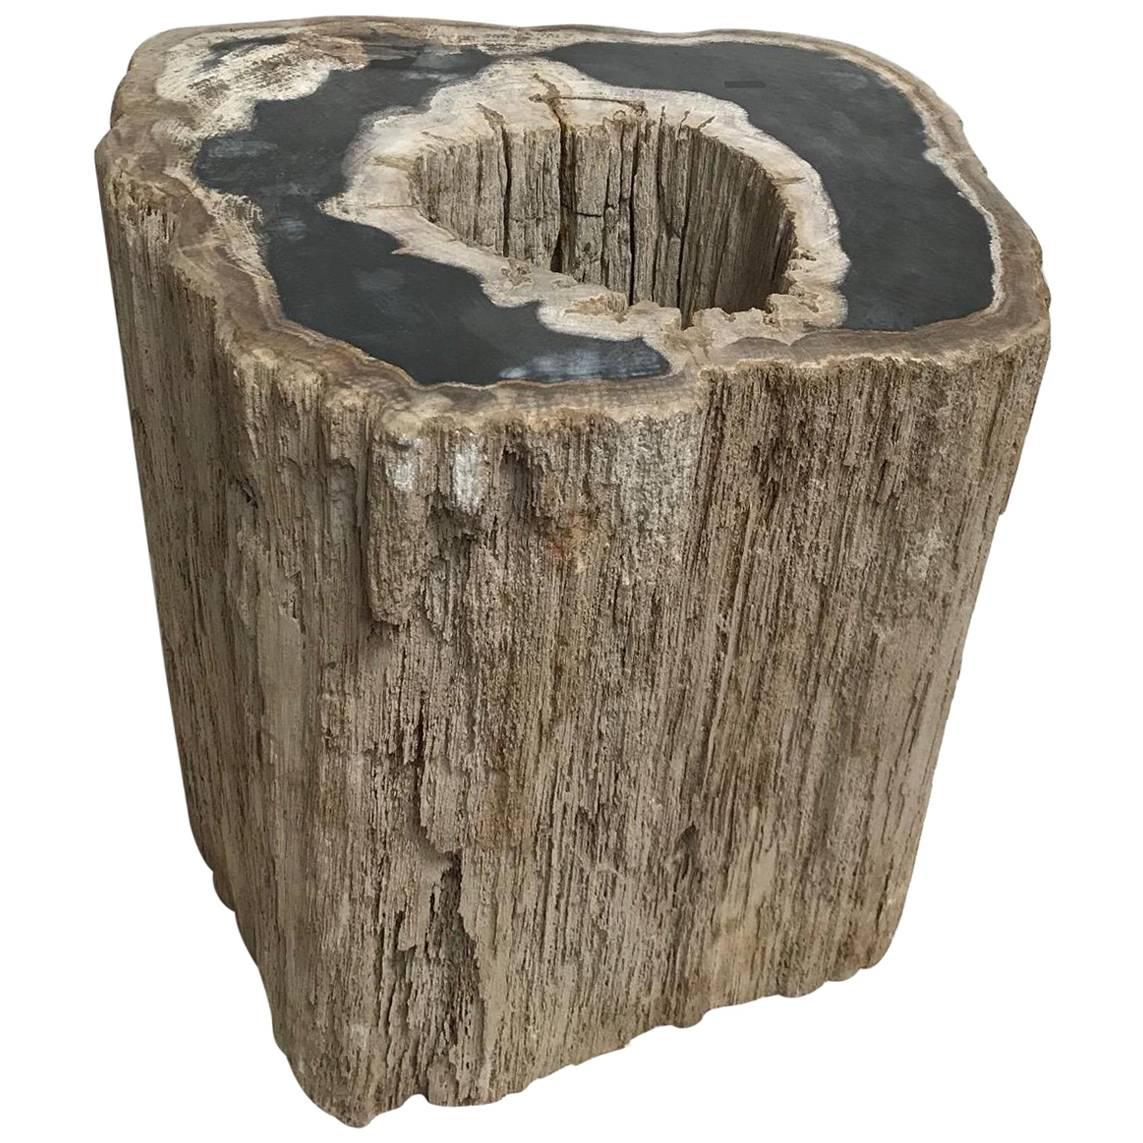 Large Petrified Wood Side Table with Hole All the Way through